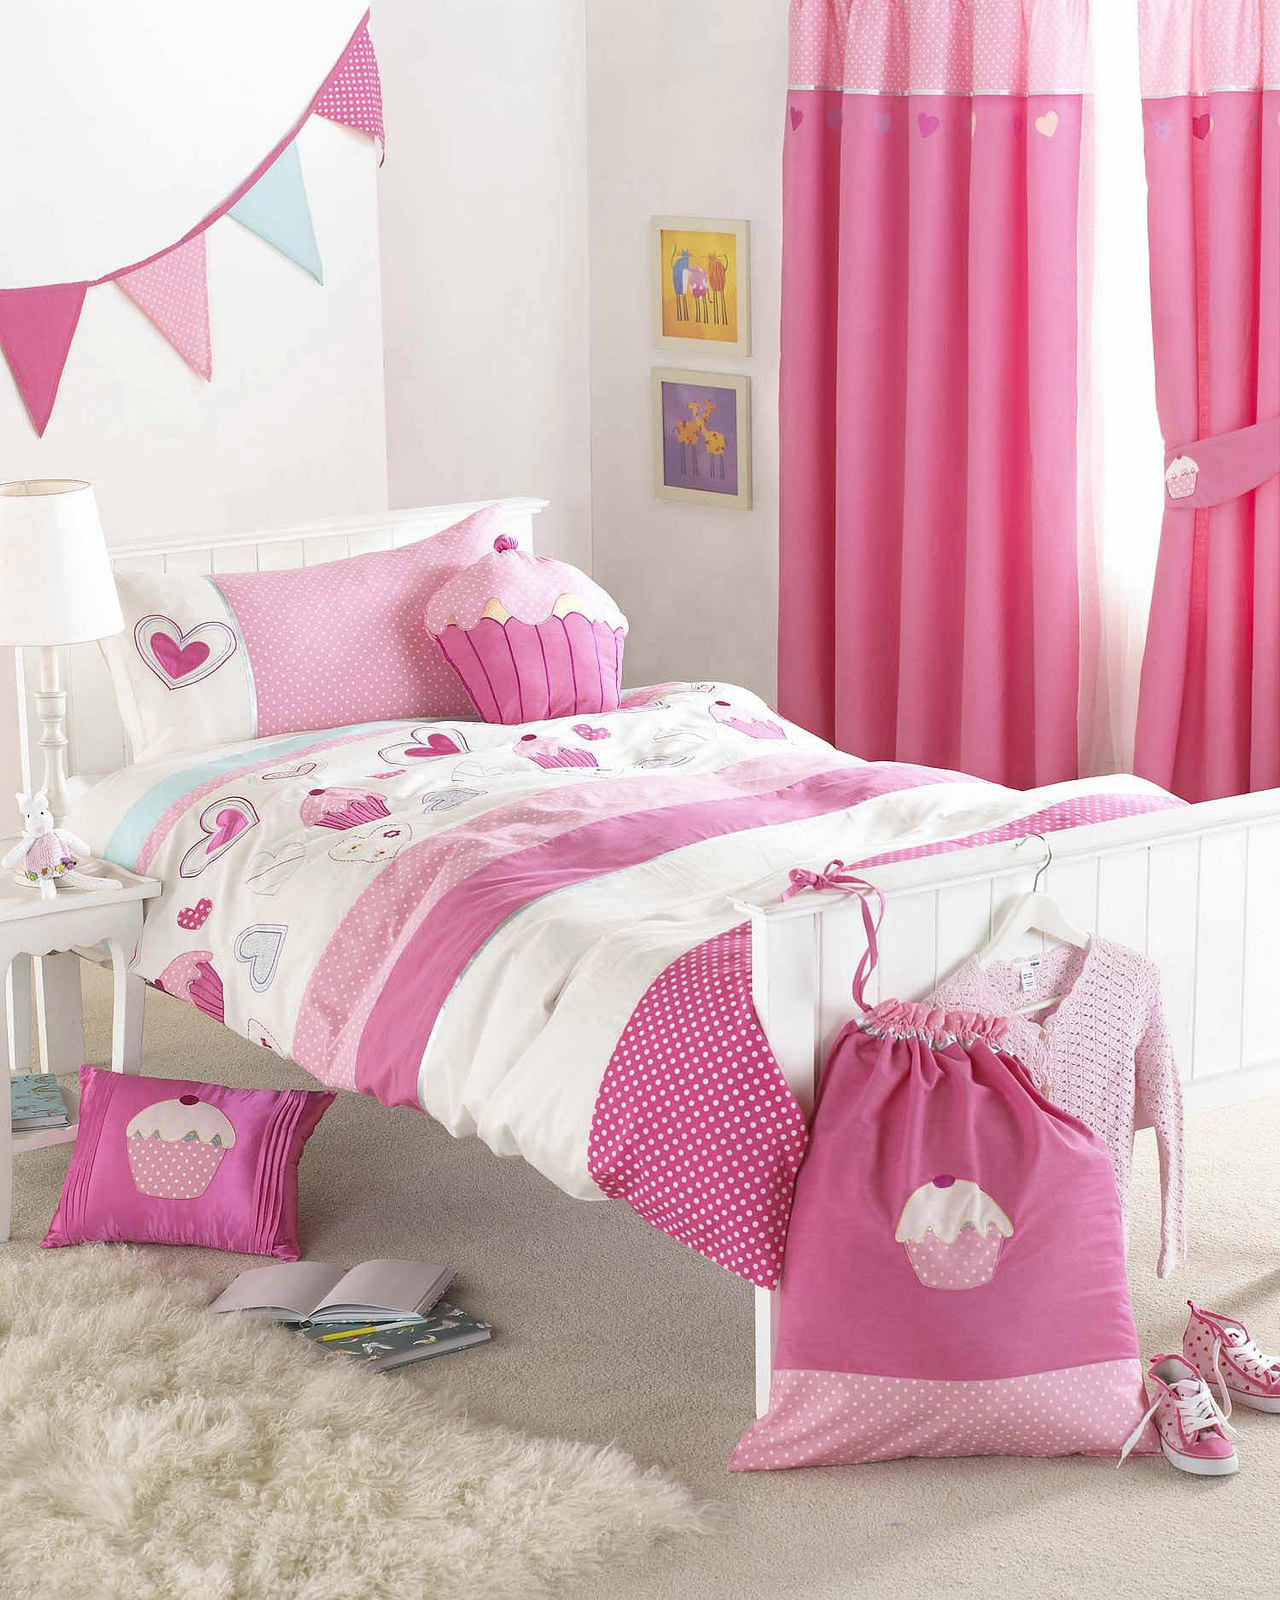 Beautiful Bedroom Ideas For Girl With Pink Curatin And Pillows Keep Your Pillowcase to Skin Health